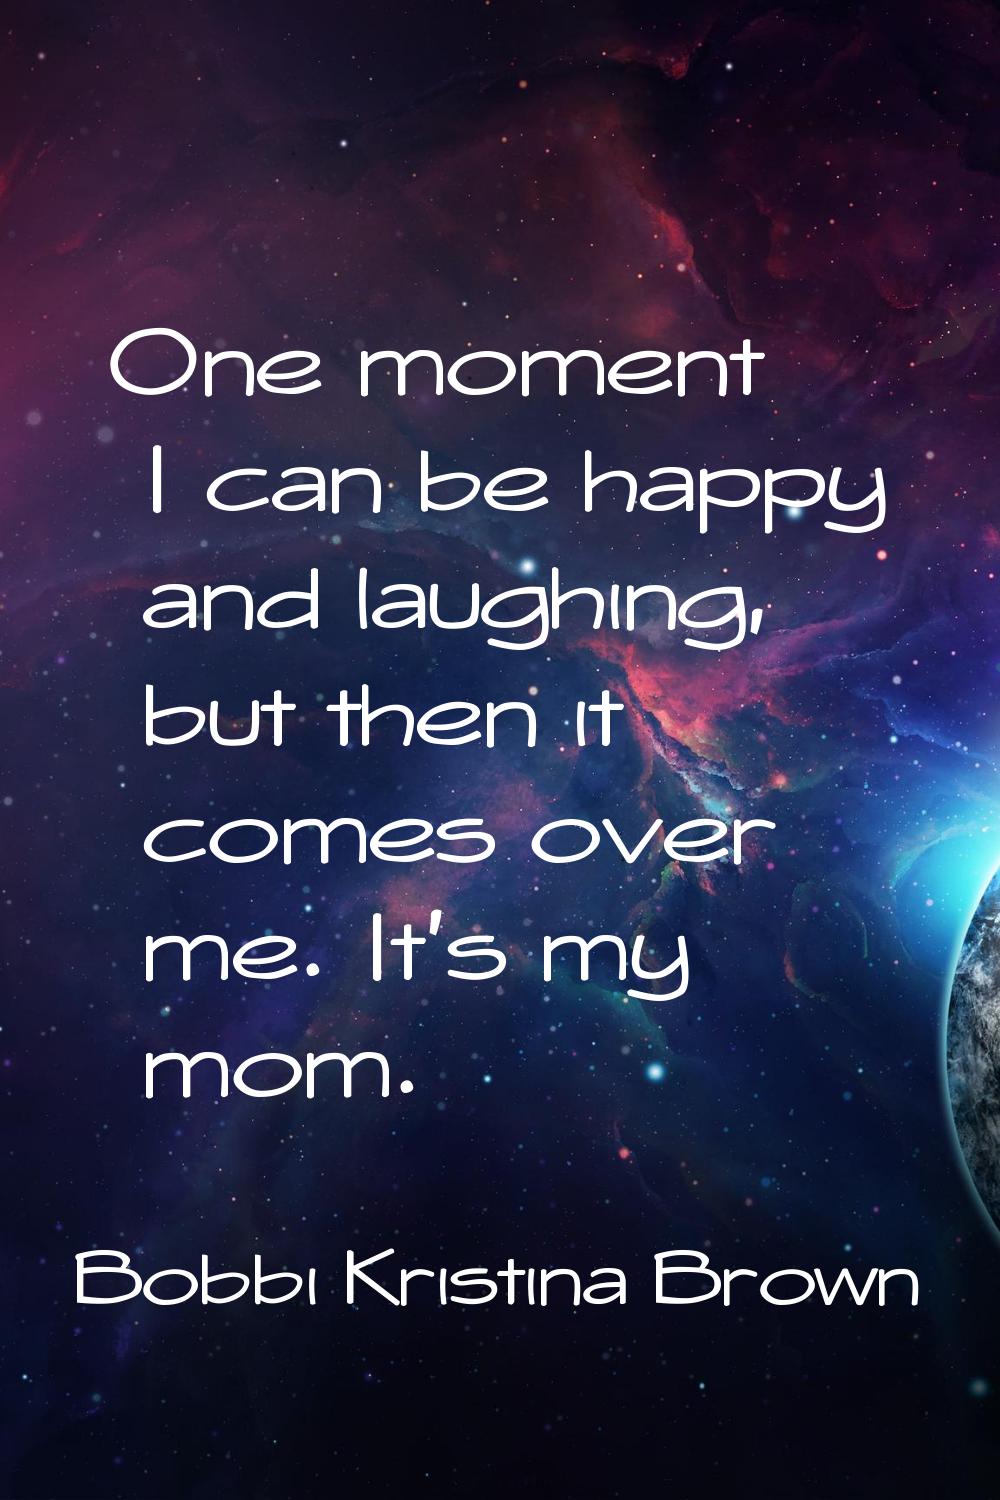 One moment I can be happy and laughing, but then it comes over me. It's my mom.